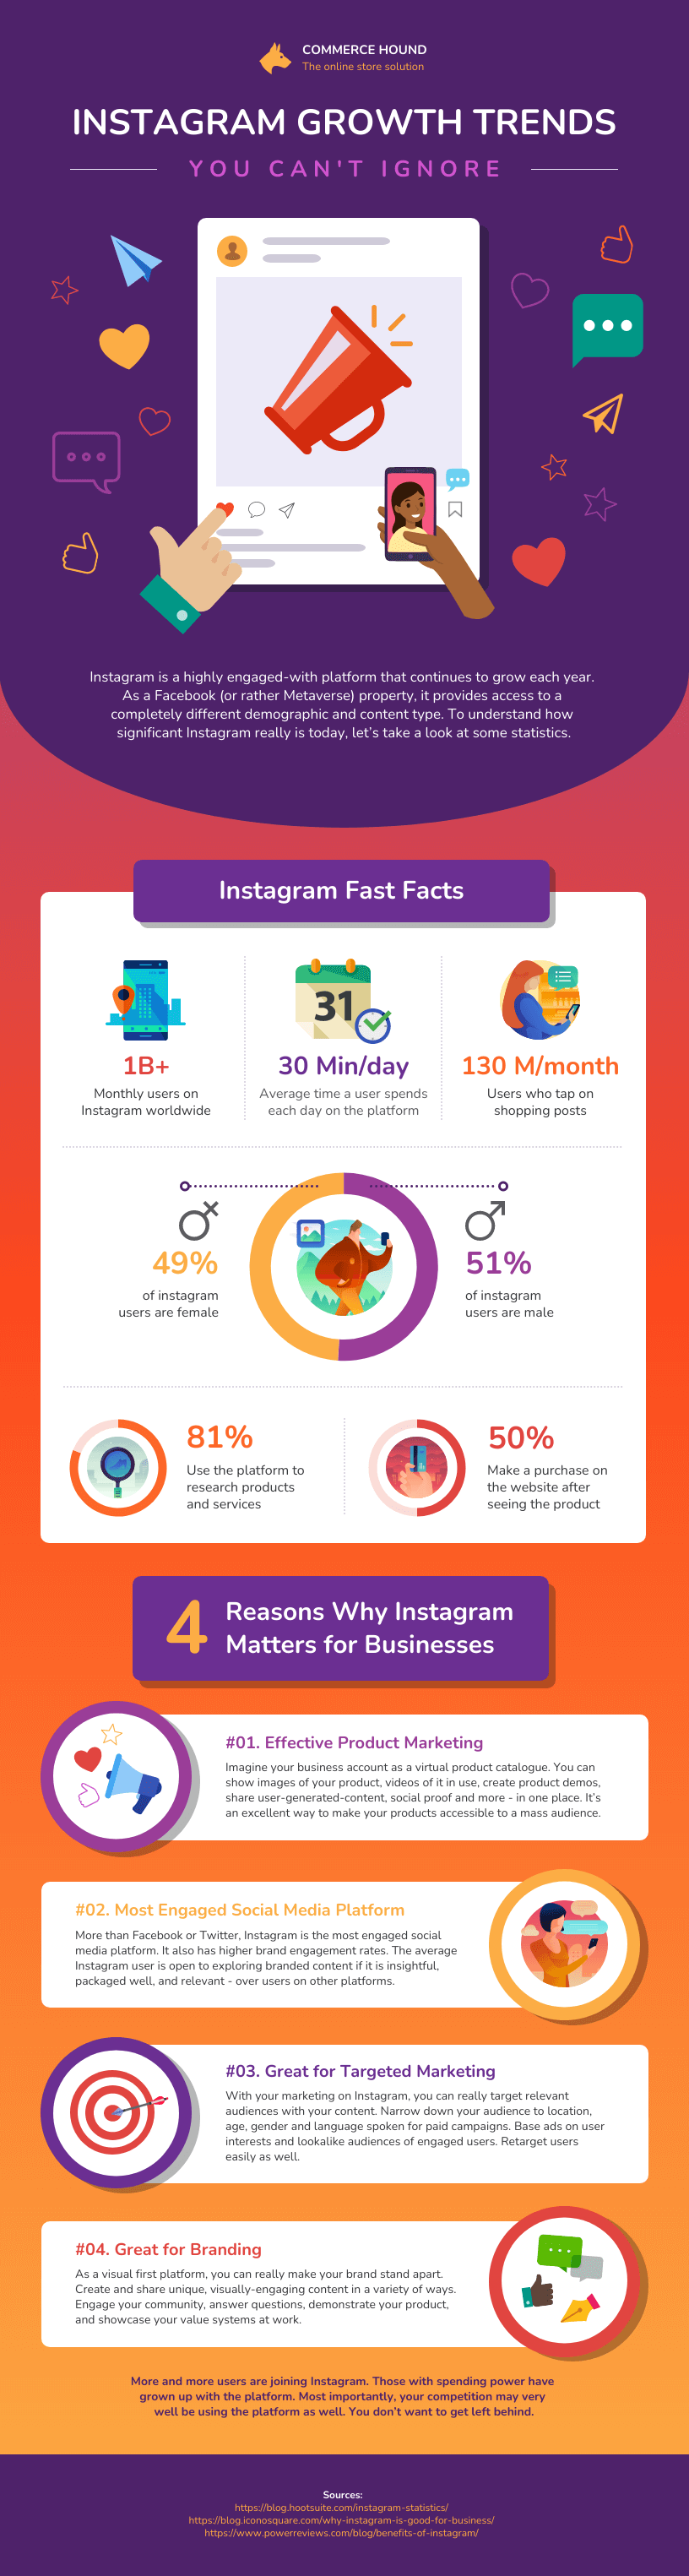 statistical informational infographic about instagram growth trends